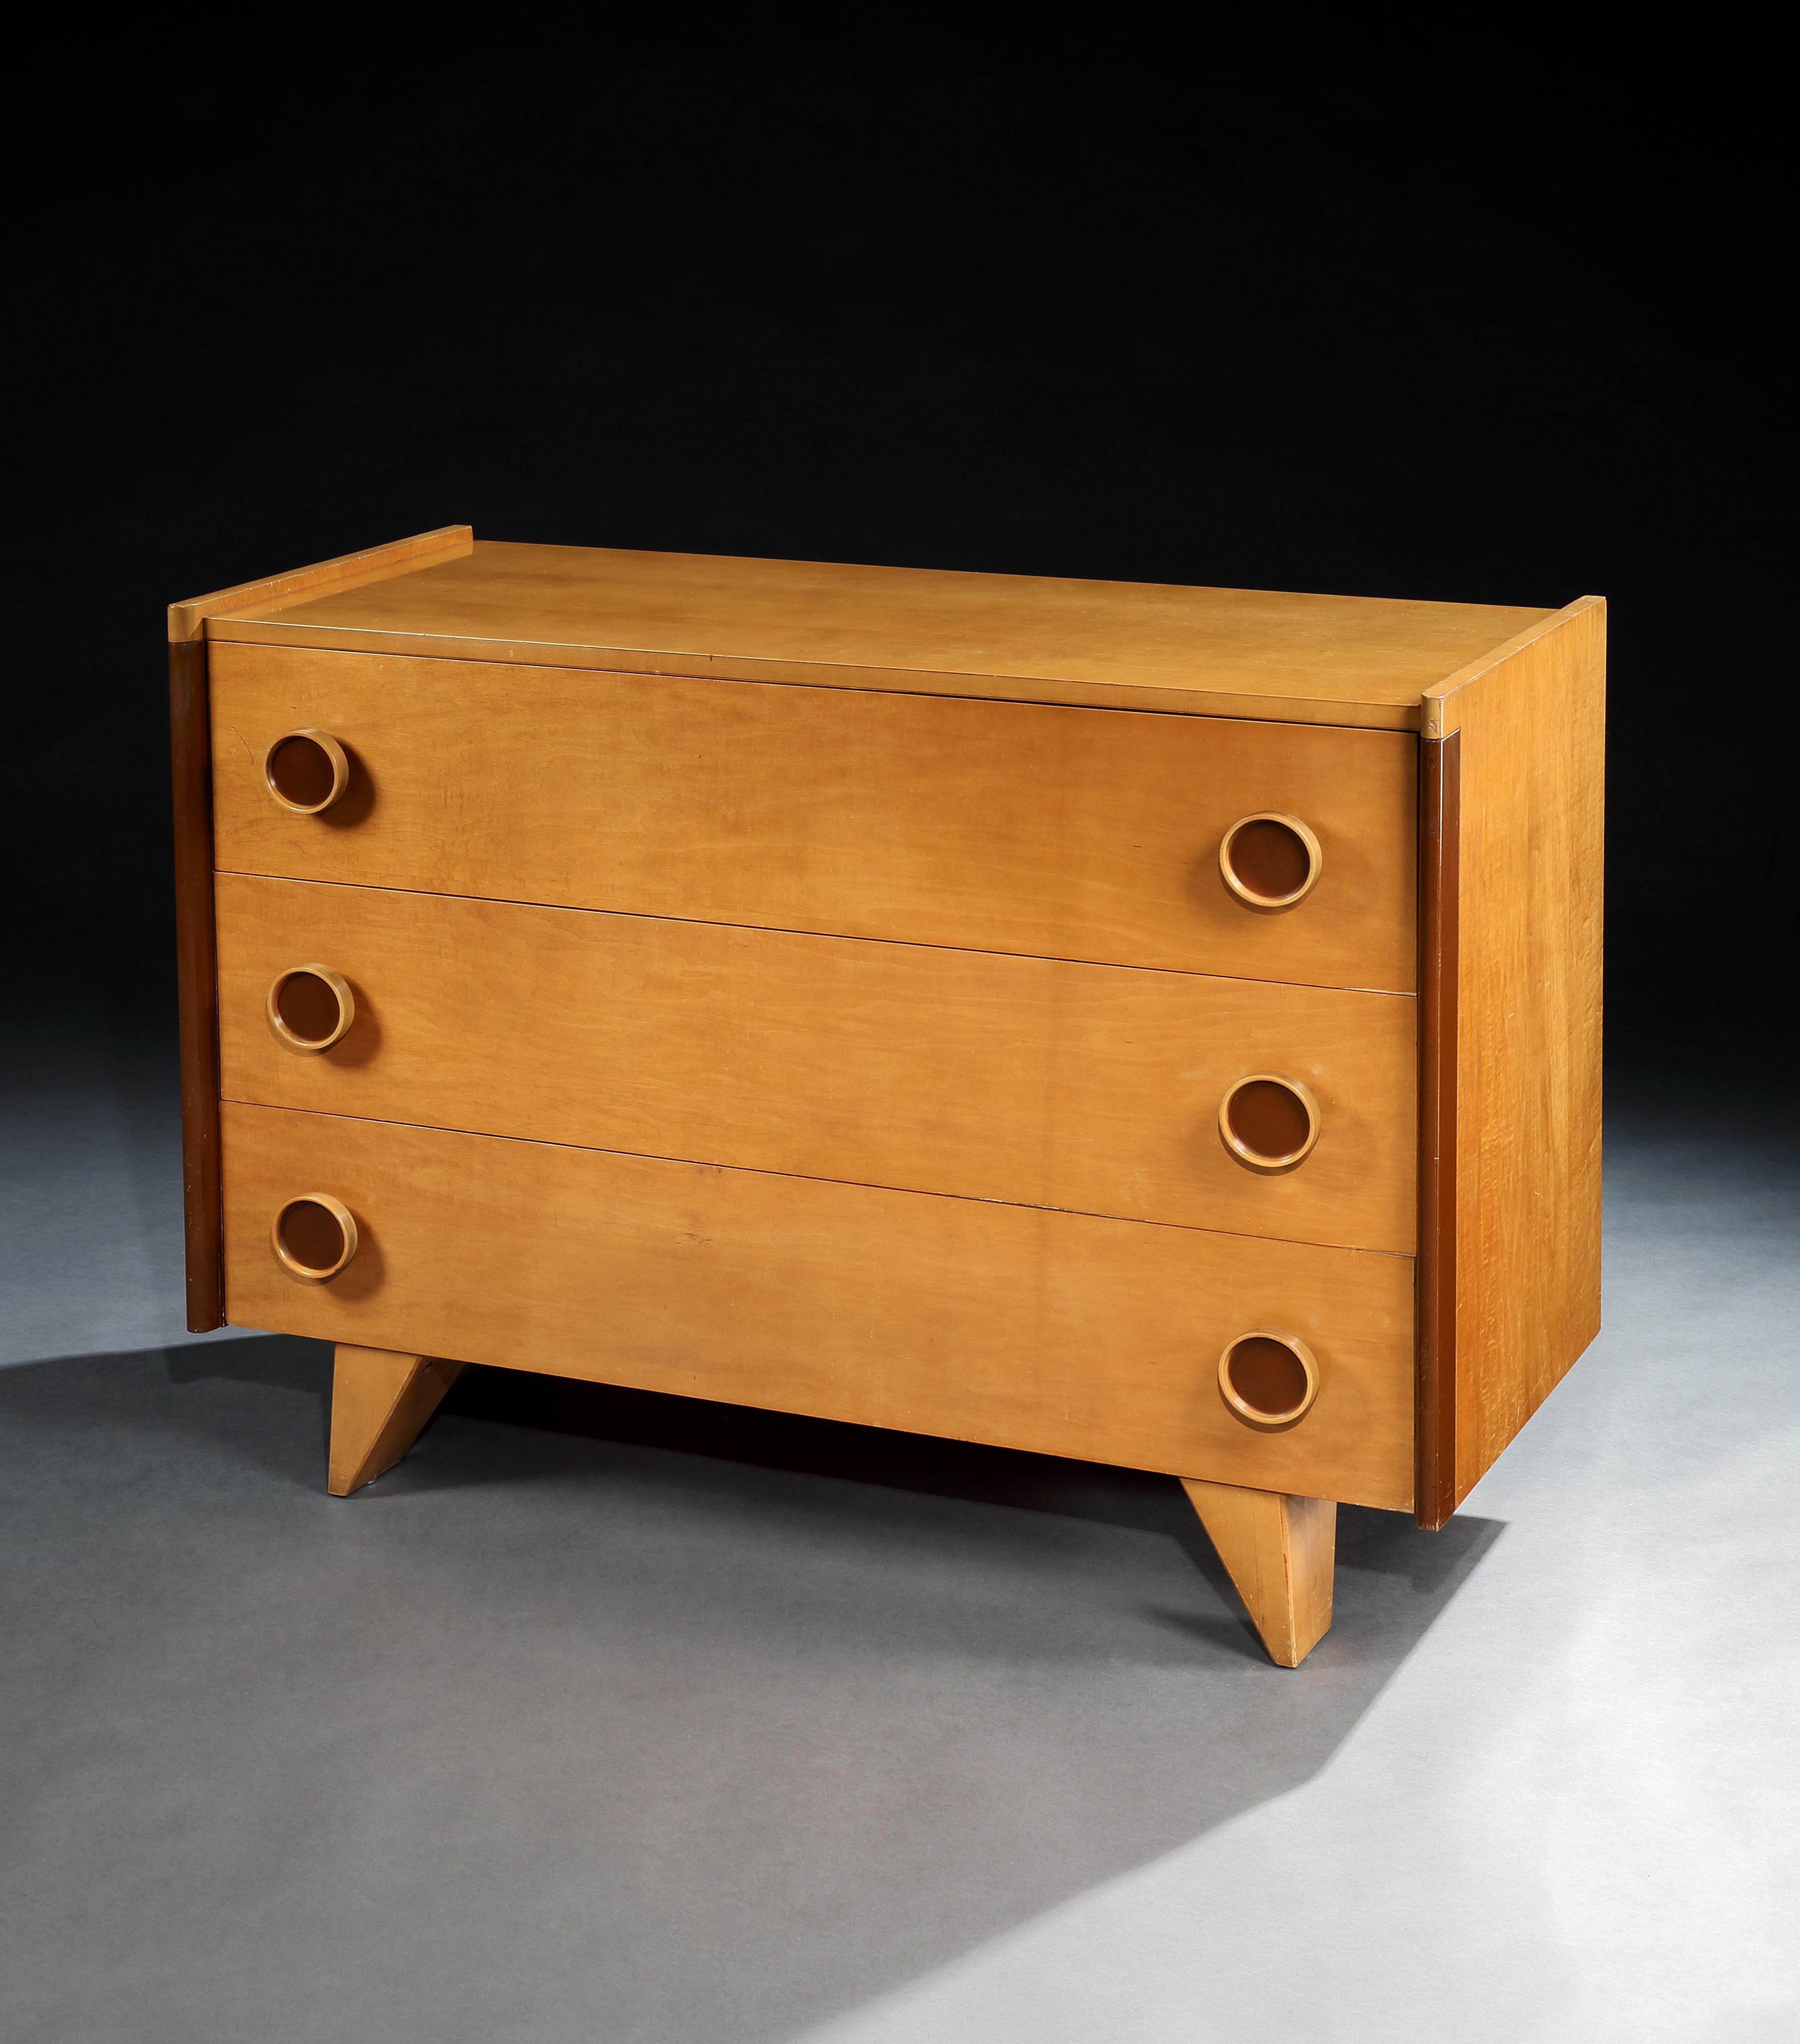 Designer : Gilbert Rohde
Model ; Dresser 4041 Honeymoon Furniture for Young America,
Maker : Kroehler
Exhibited :   'America at Home' at the New York World's Fair 1940.  

Created by Gilbert Rohde, 1940's foremost furniture designer, expressly to